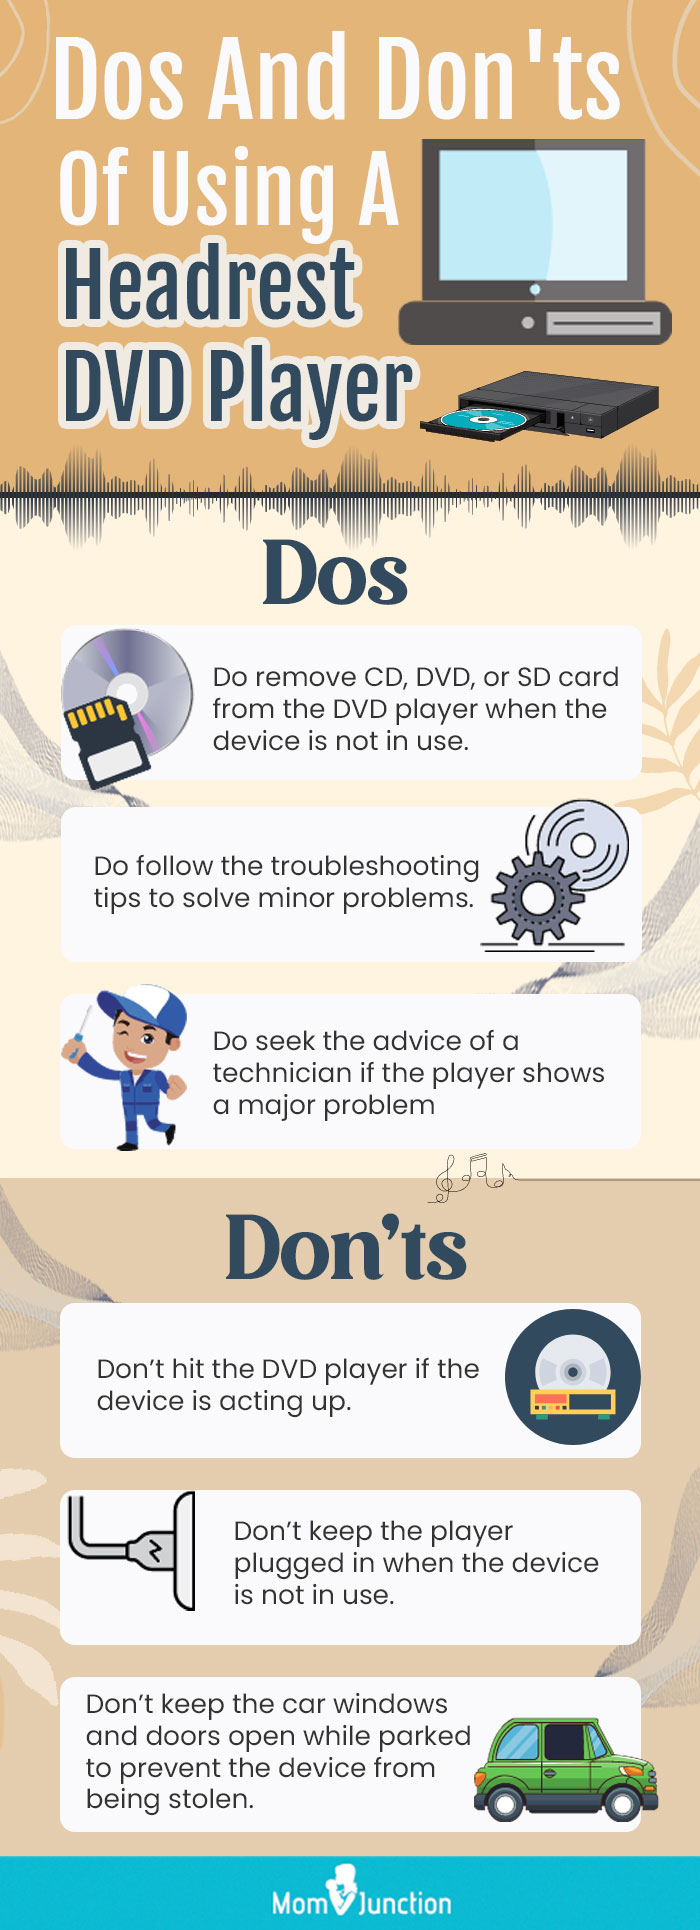 Dos And Don'ts Of Using A Headrest DVD Player (infographic)